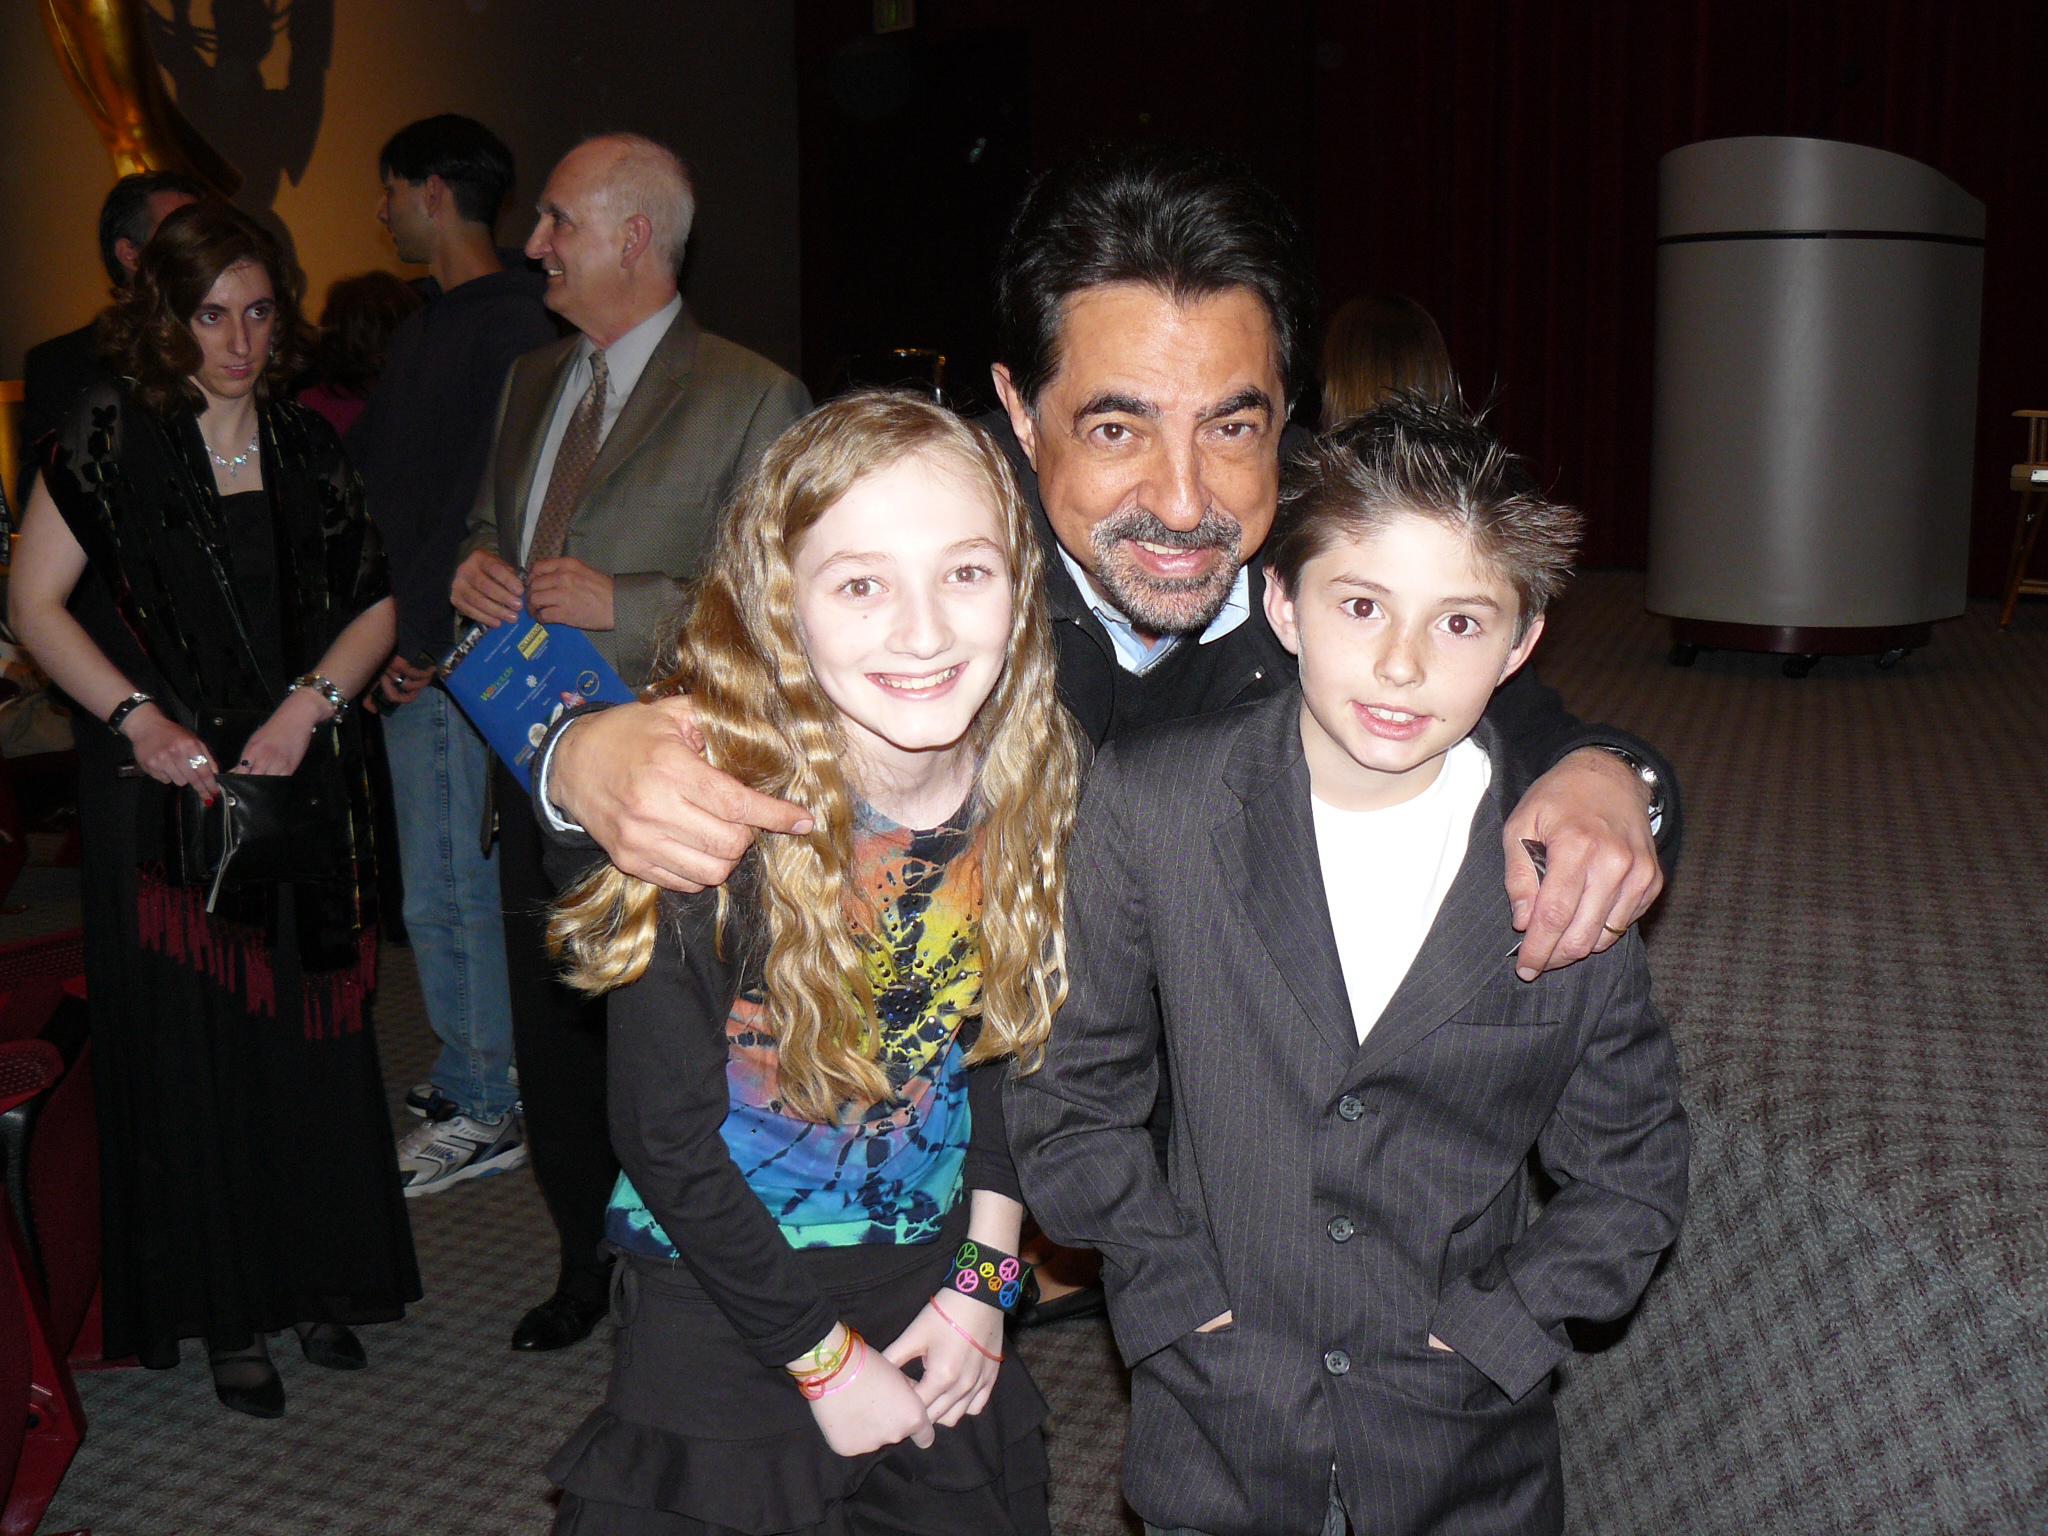 Charlene with actor Joe Mantegna (Criminal Minds) and a family friend of the official premiere of her movie 